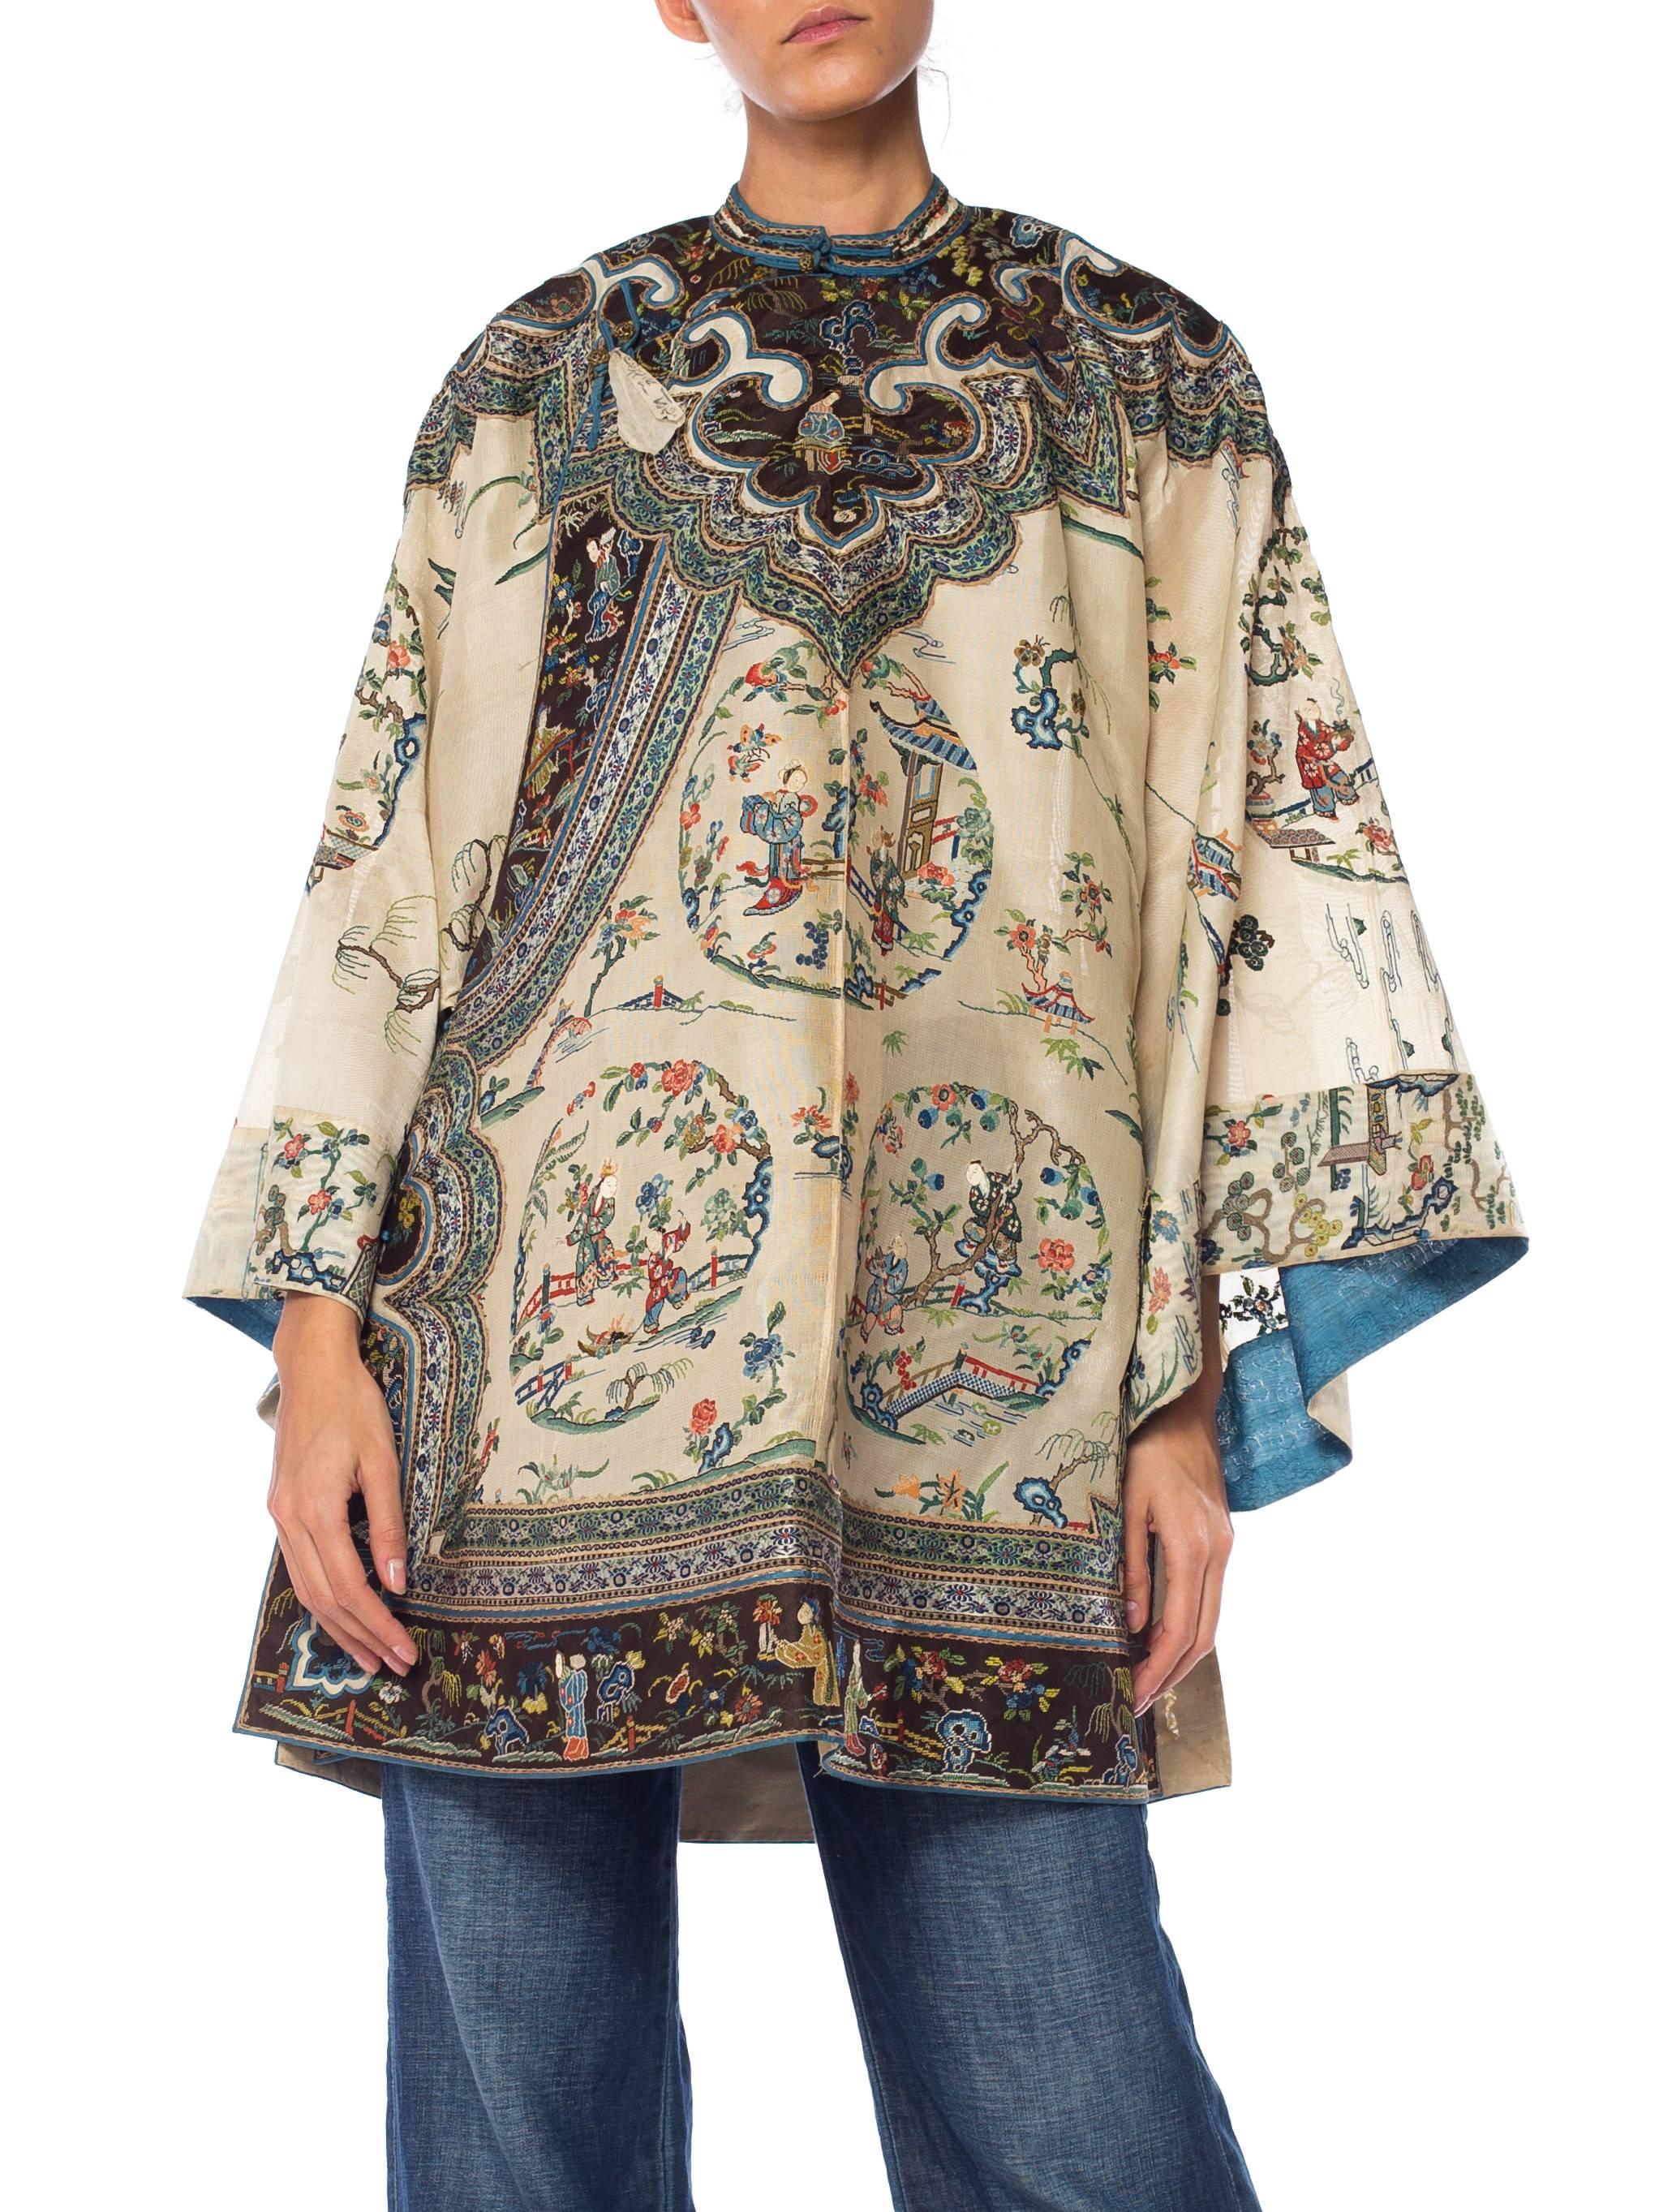 This is a truly phenomenal example of late Qing Dynasty embroidery work. This piece is over 120 years old and is in wearable condition with care and will fit a large size. There is no visible damage nor dry rot however there are a few small areas of